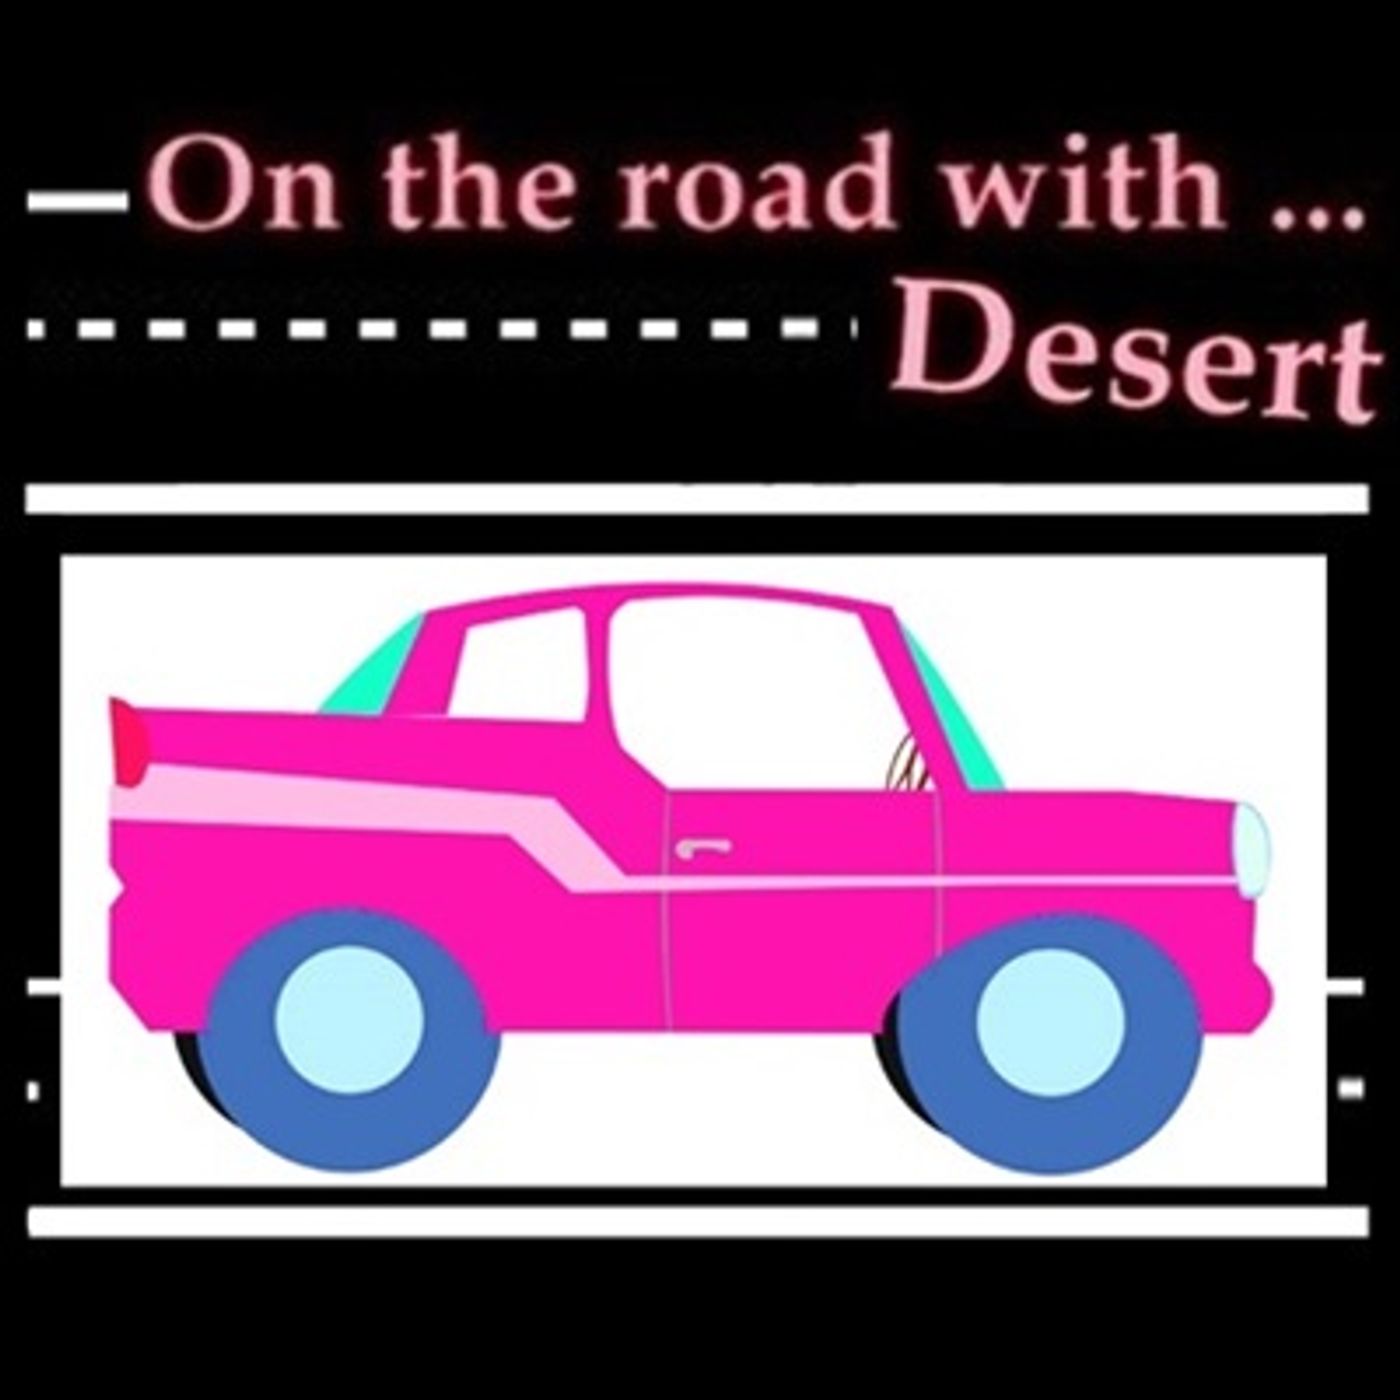 On The Road with Desert